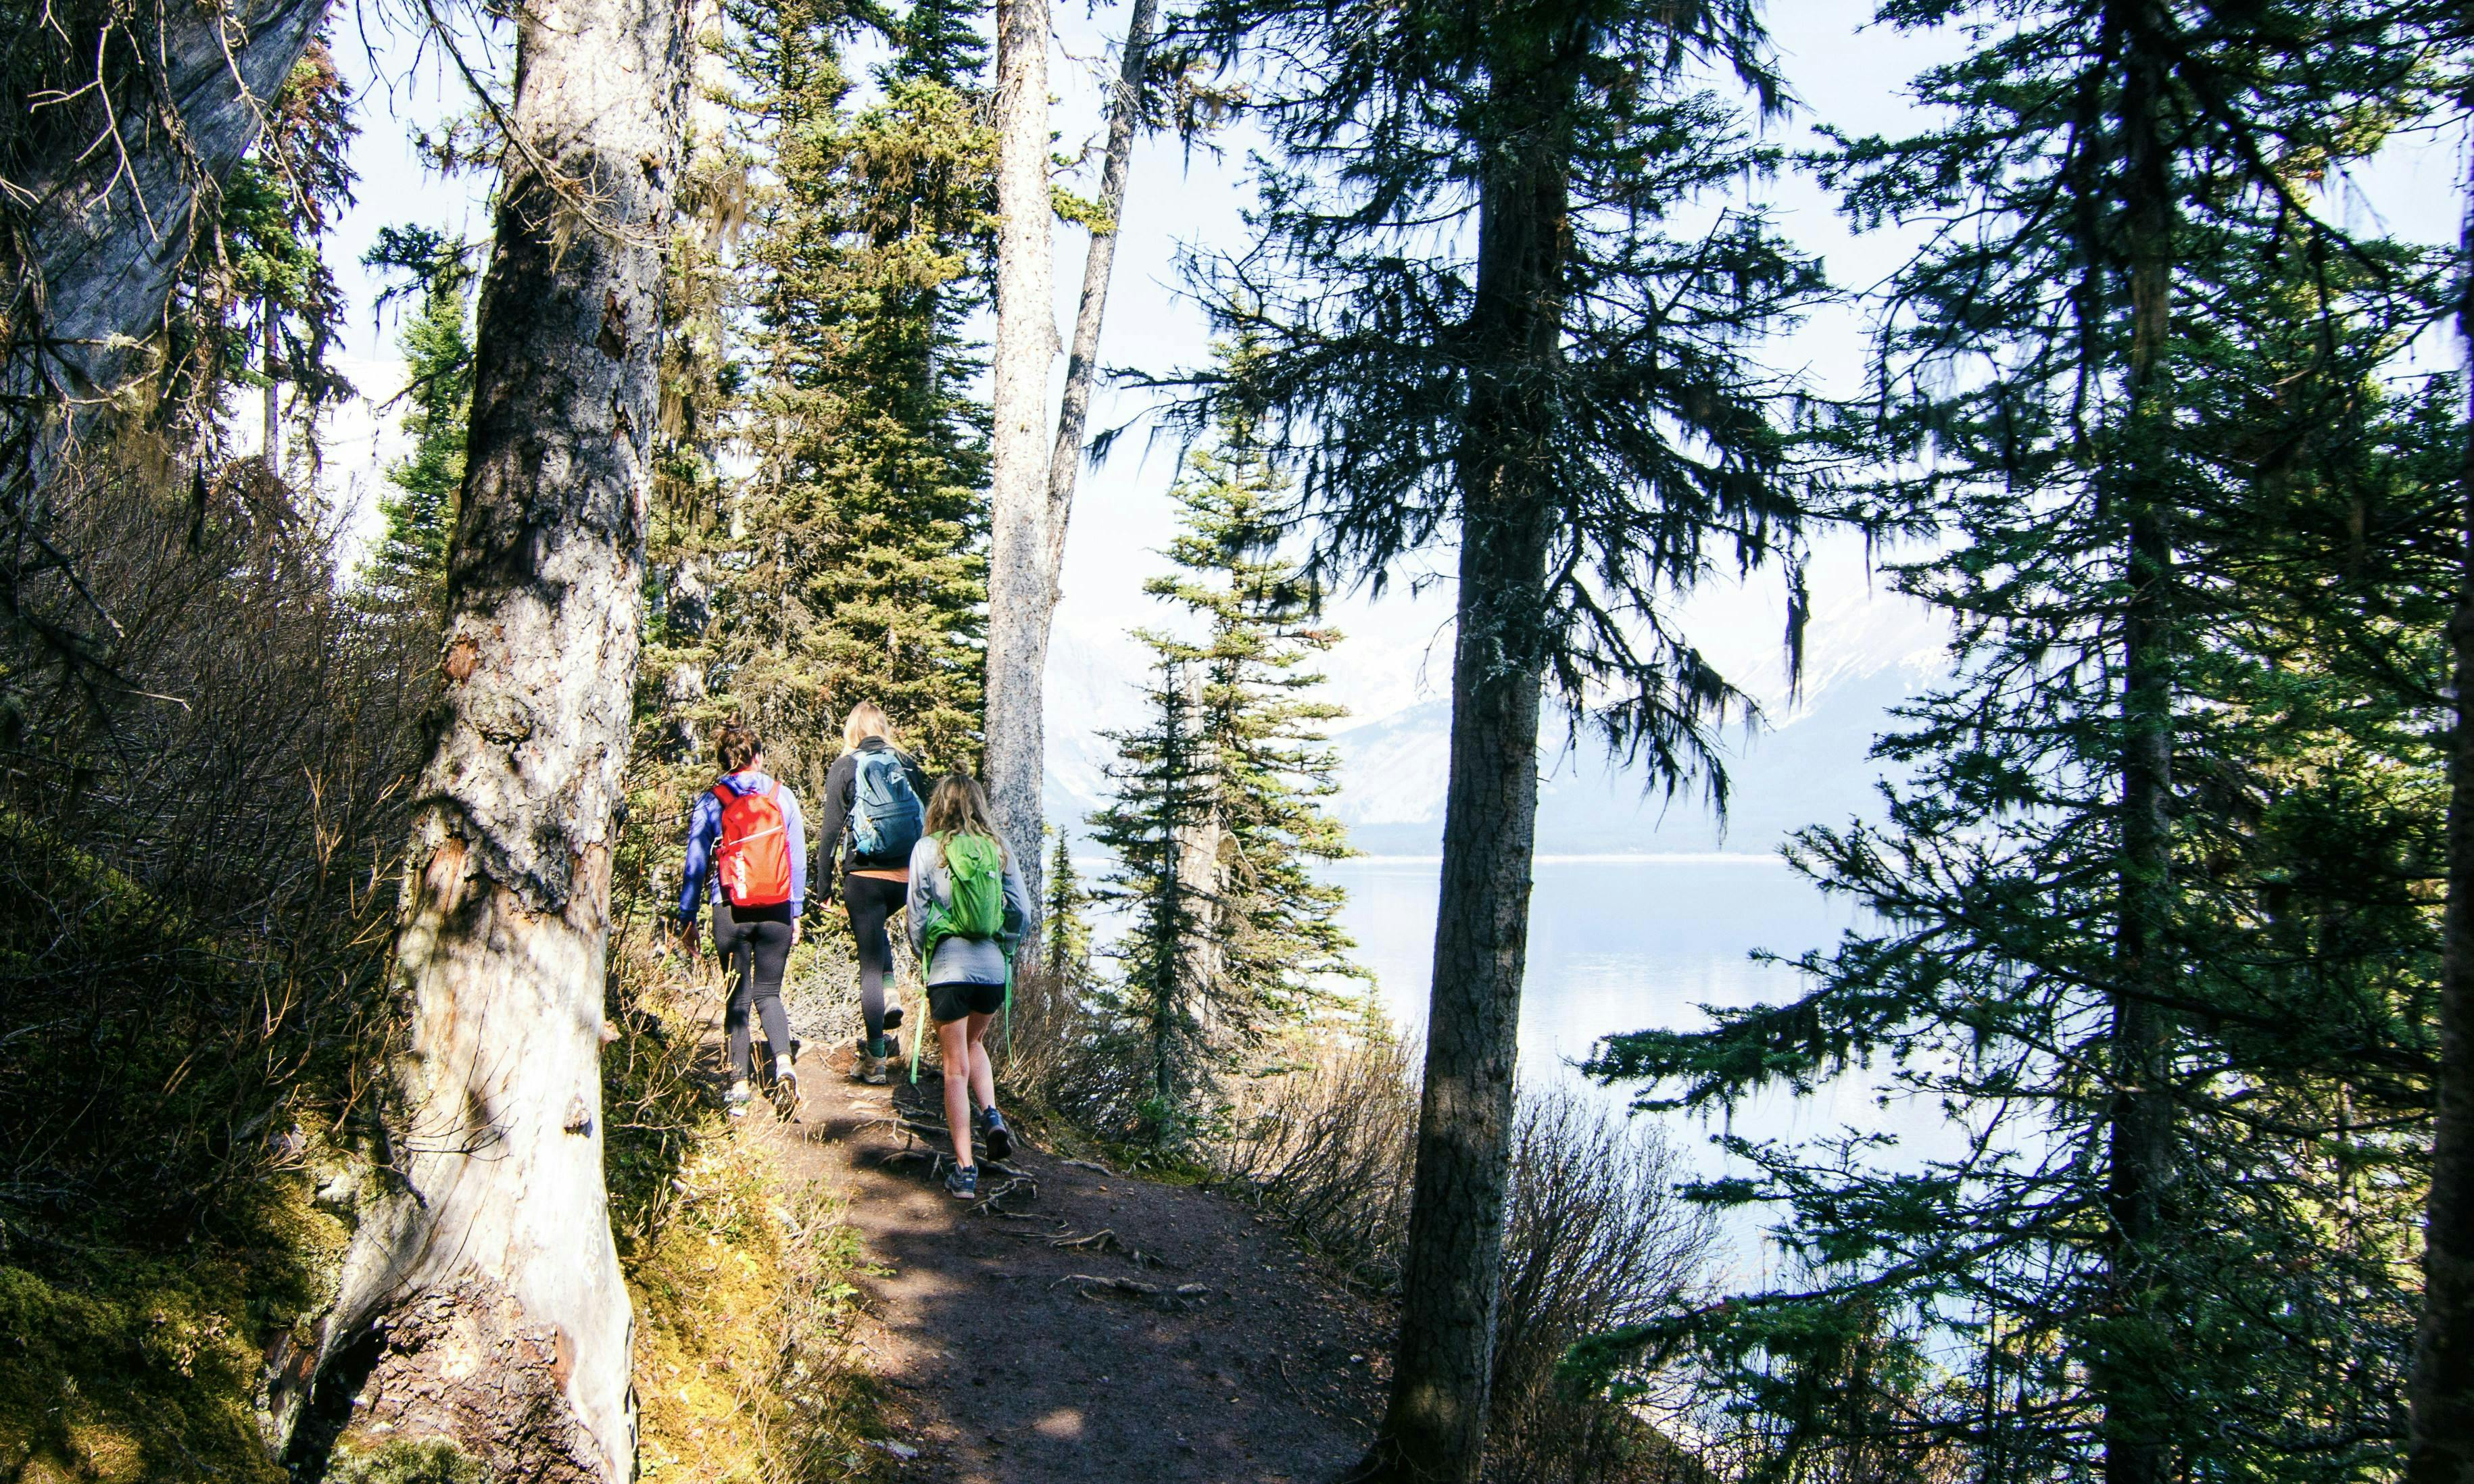 Hikers on trail with trees